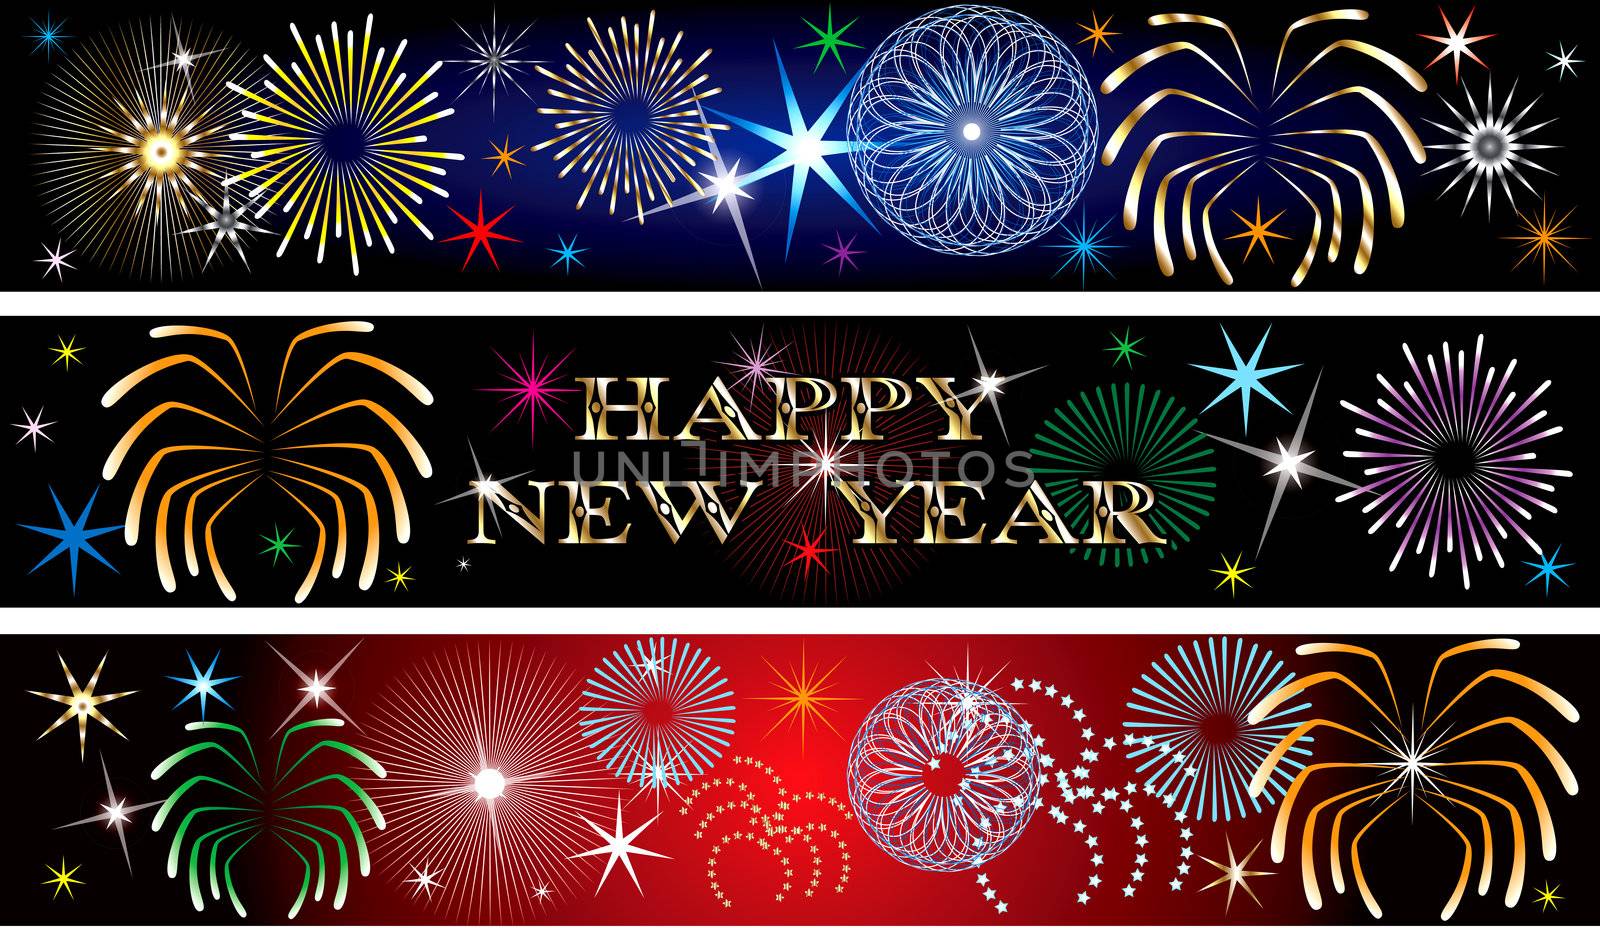 New Year Firework Banners 2 by basheeradesigns